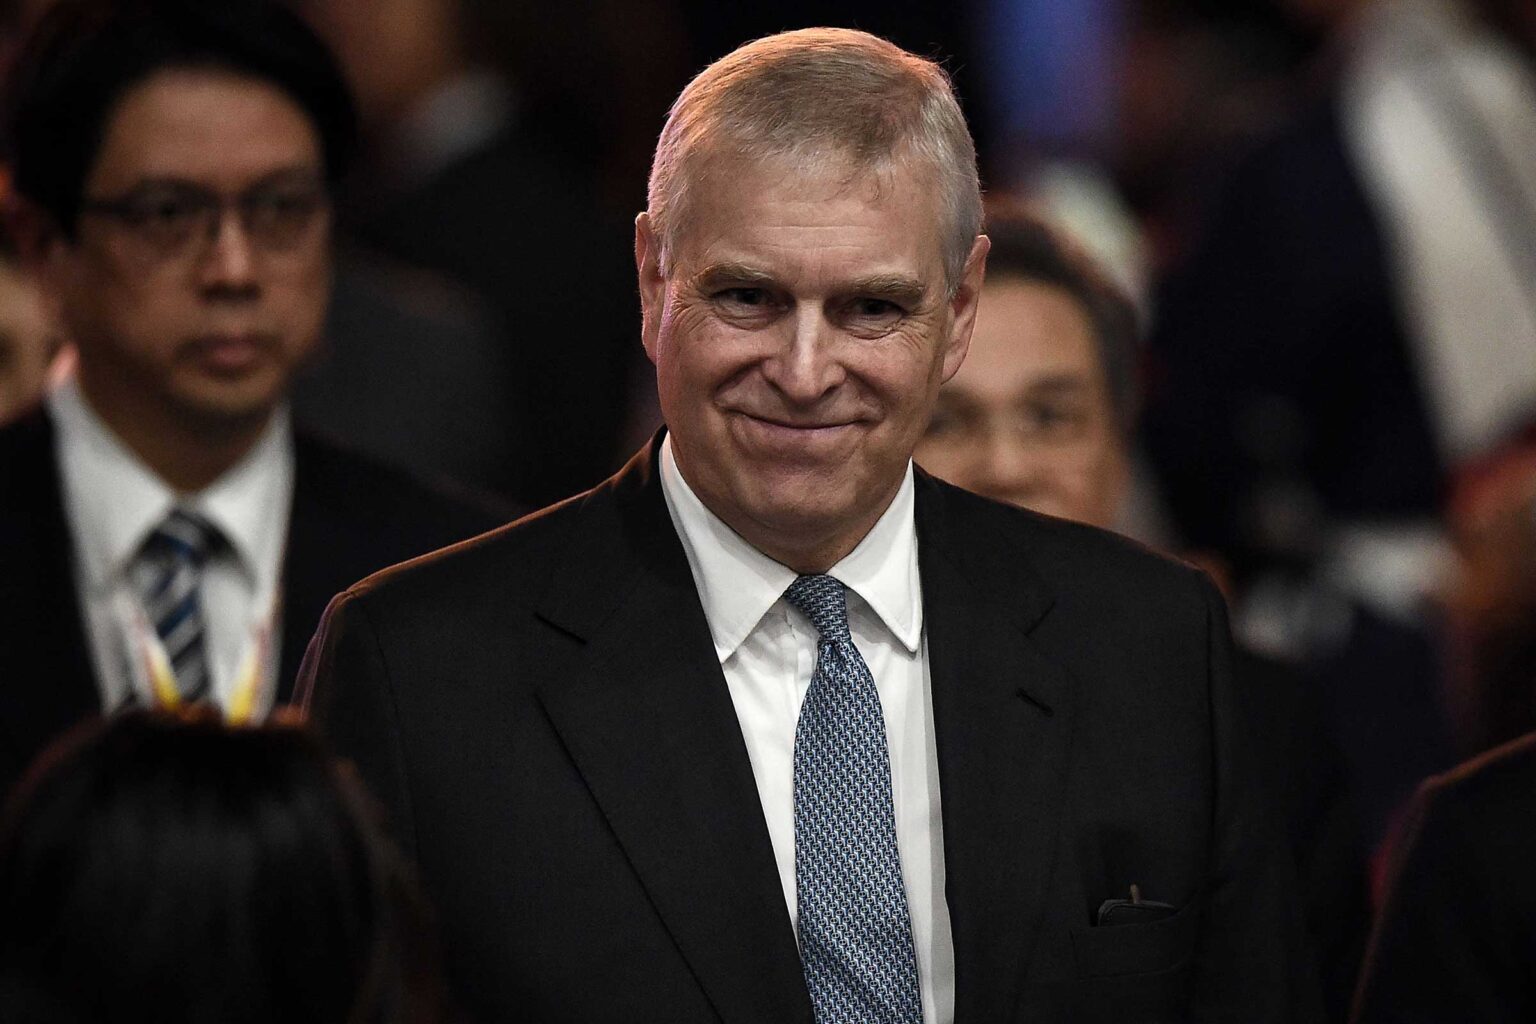 Prince Andrew, friend of Jeffrey Epstein, denies sexual assault allegations. But will Prince Andrew come forward with more information about Epstein?